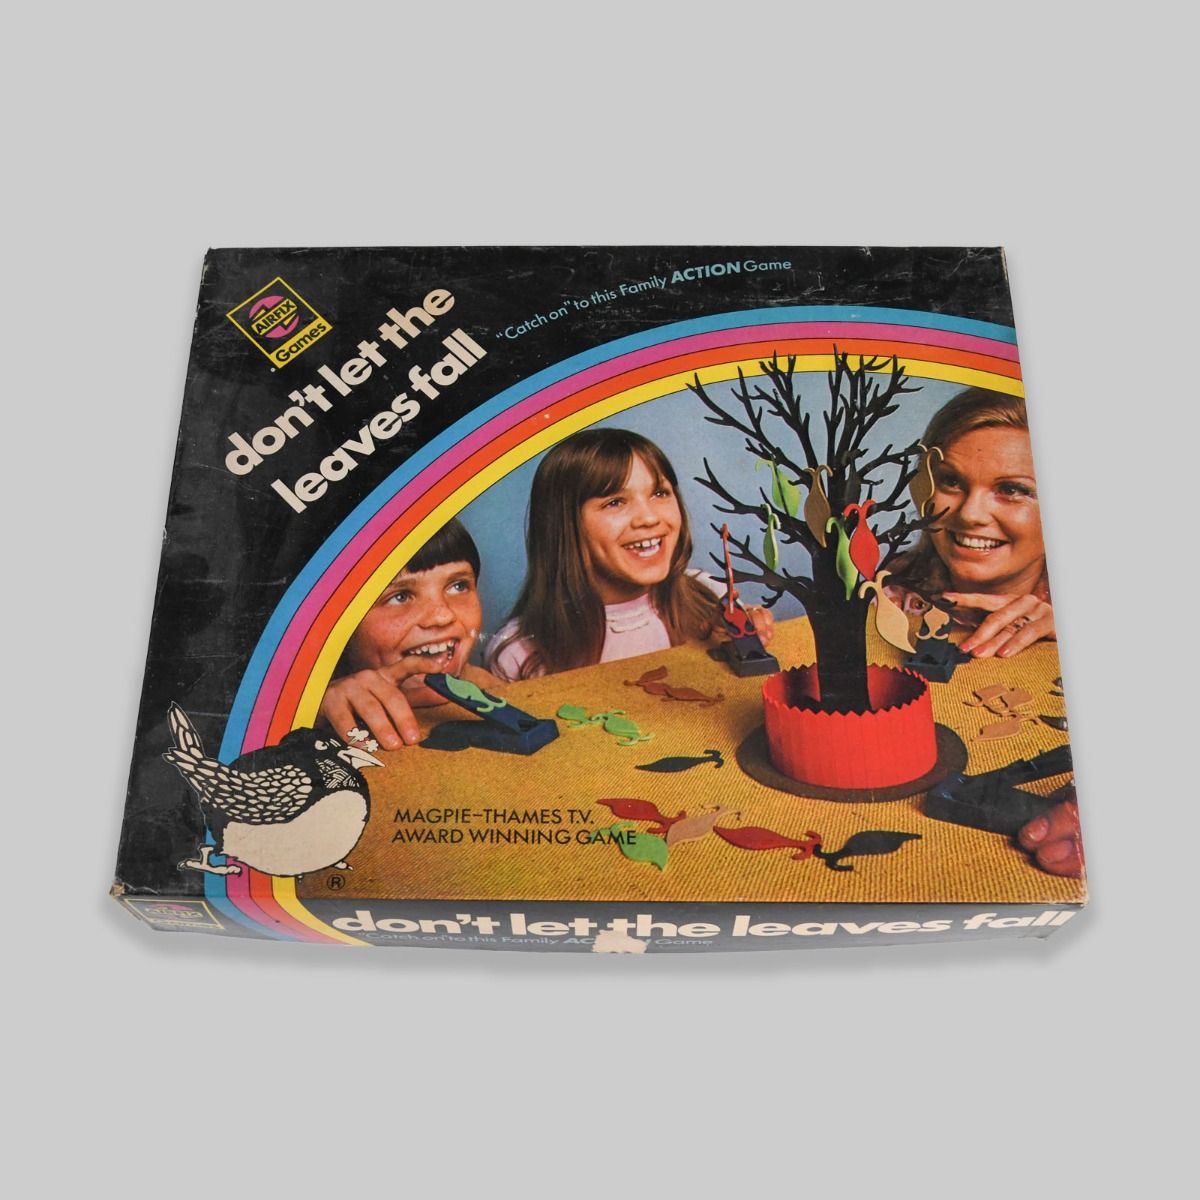 'Don't Let The Leaves Fall' 1972 Board Game